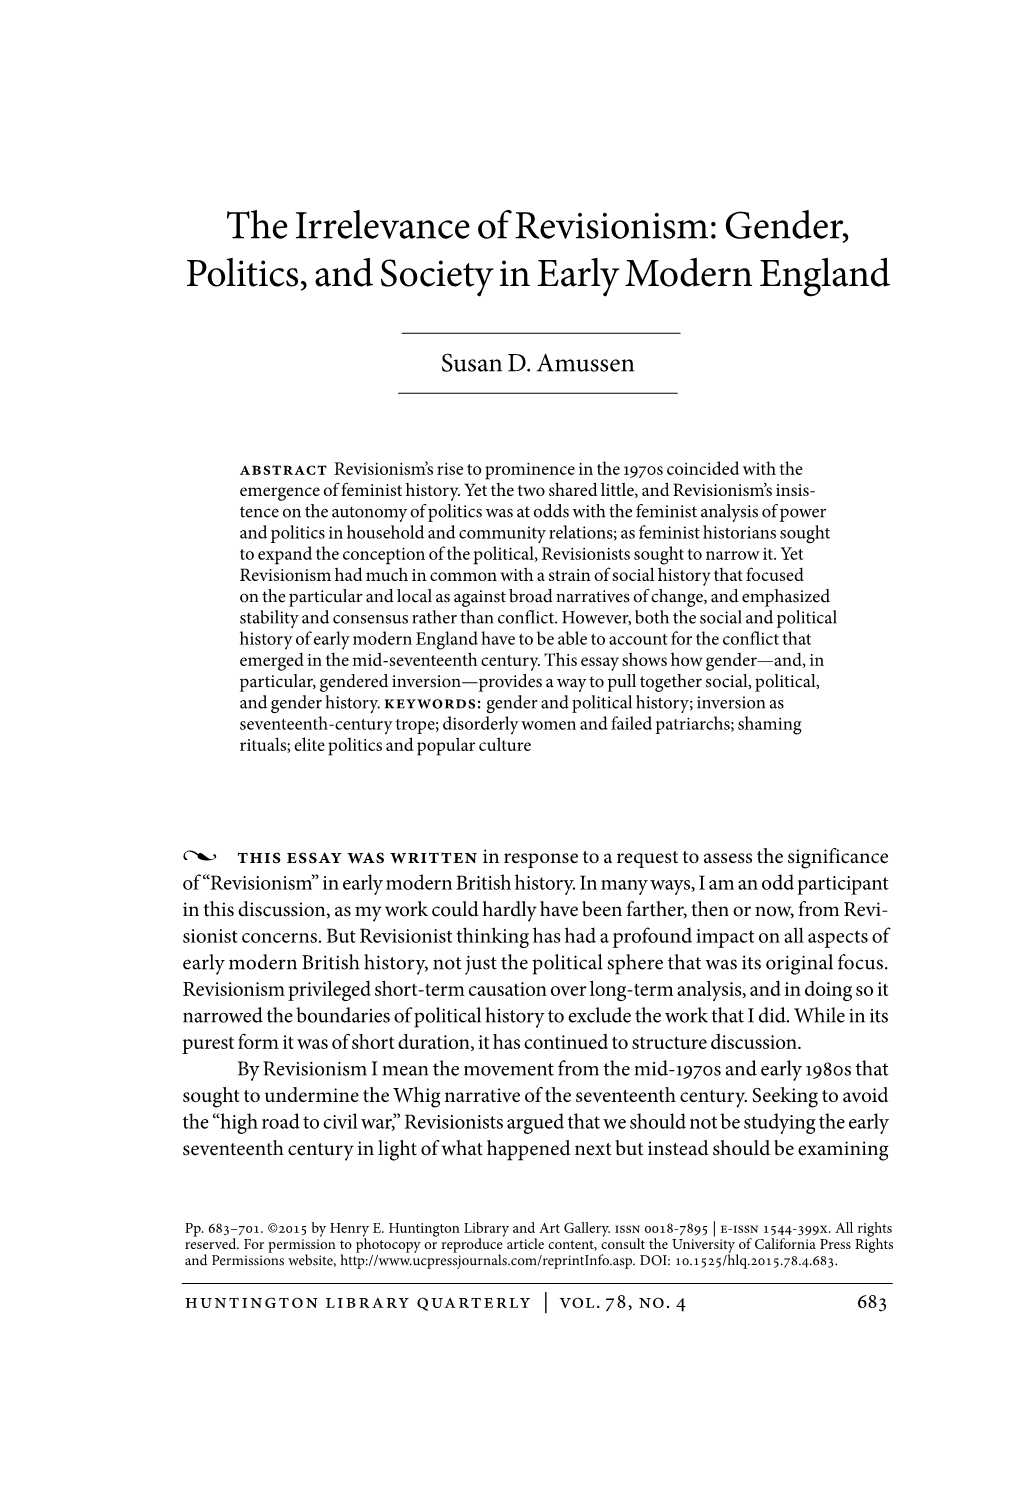 The Irrelevance of Revisionism: Gender, Politics, and Society in Early Modern England